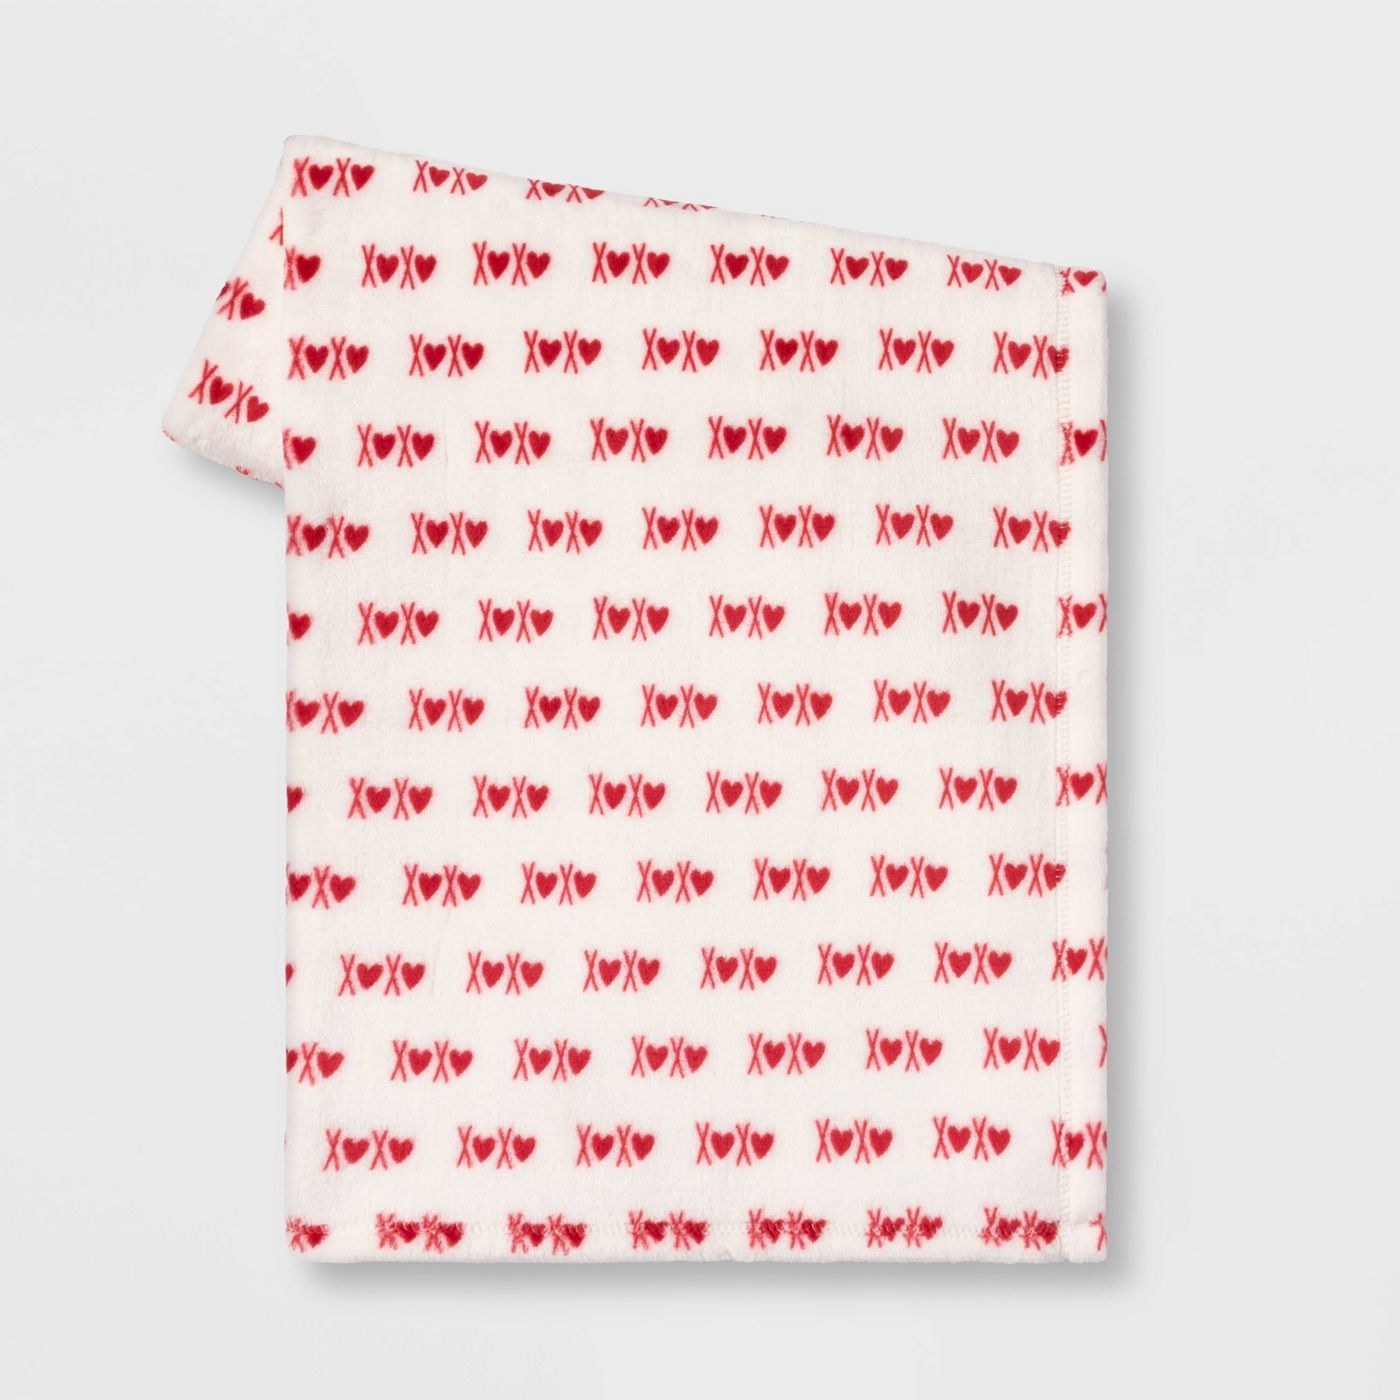 The blanket, which is white, with &quot;xoxo&quot; printed in red, with the &quot;o&quot;s replaced with hearts